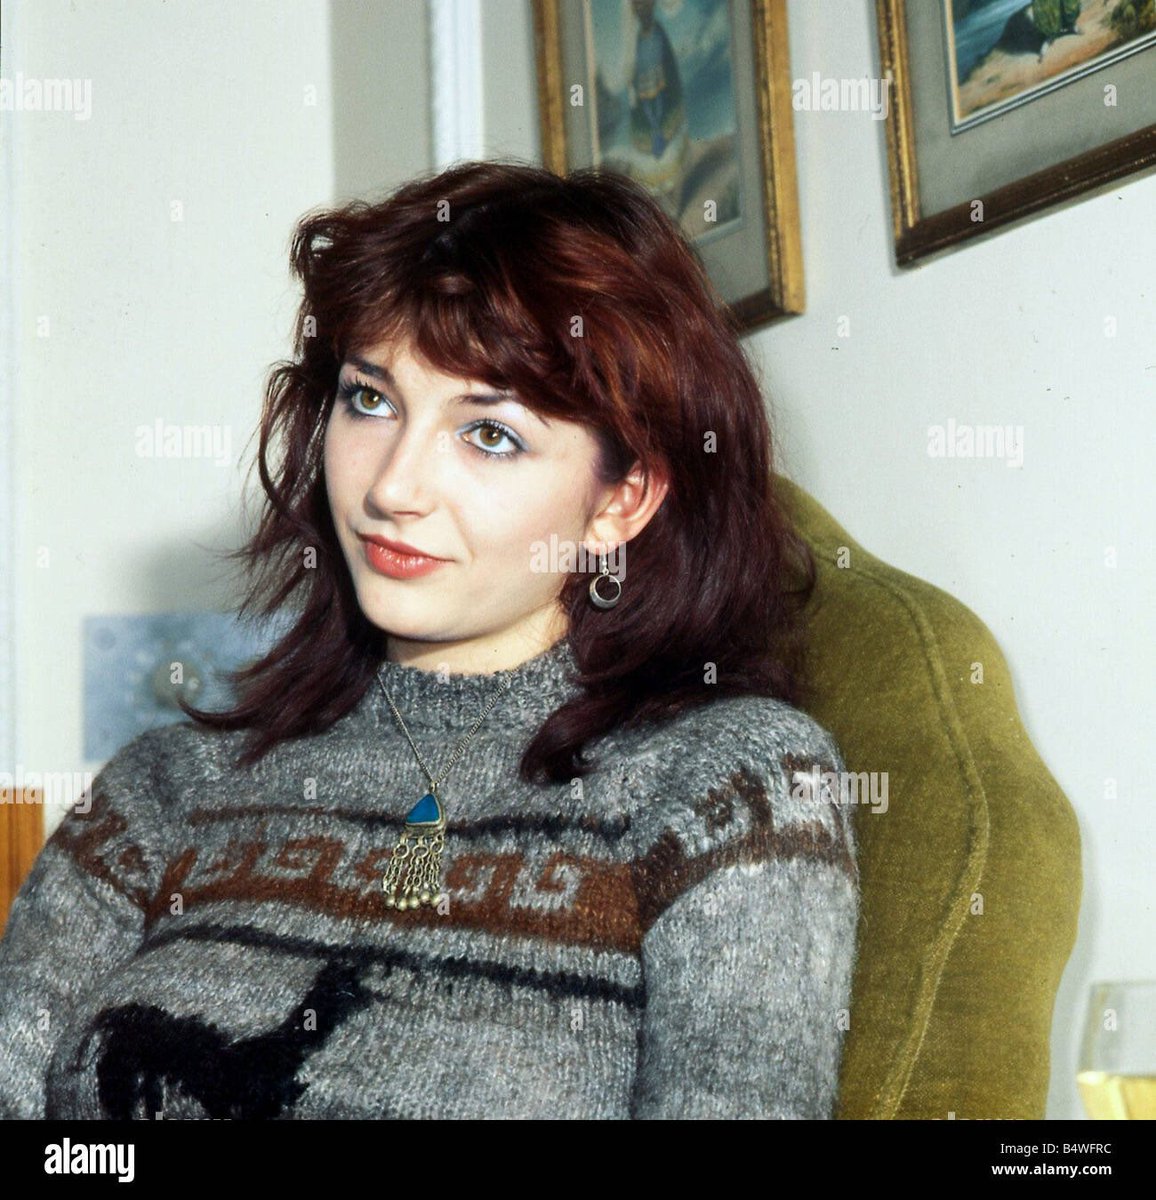 On our latest episode of Music Maps Podcast - the early years of @KateBushMusic with biographer @Tom_Doyle_ as our guide - listen: rocknrollbookclub.co.uk/musicmaps/